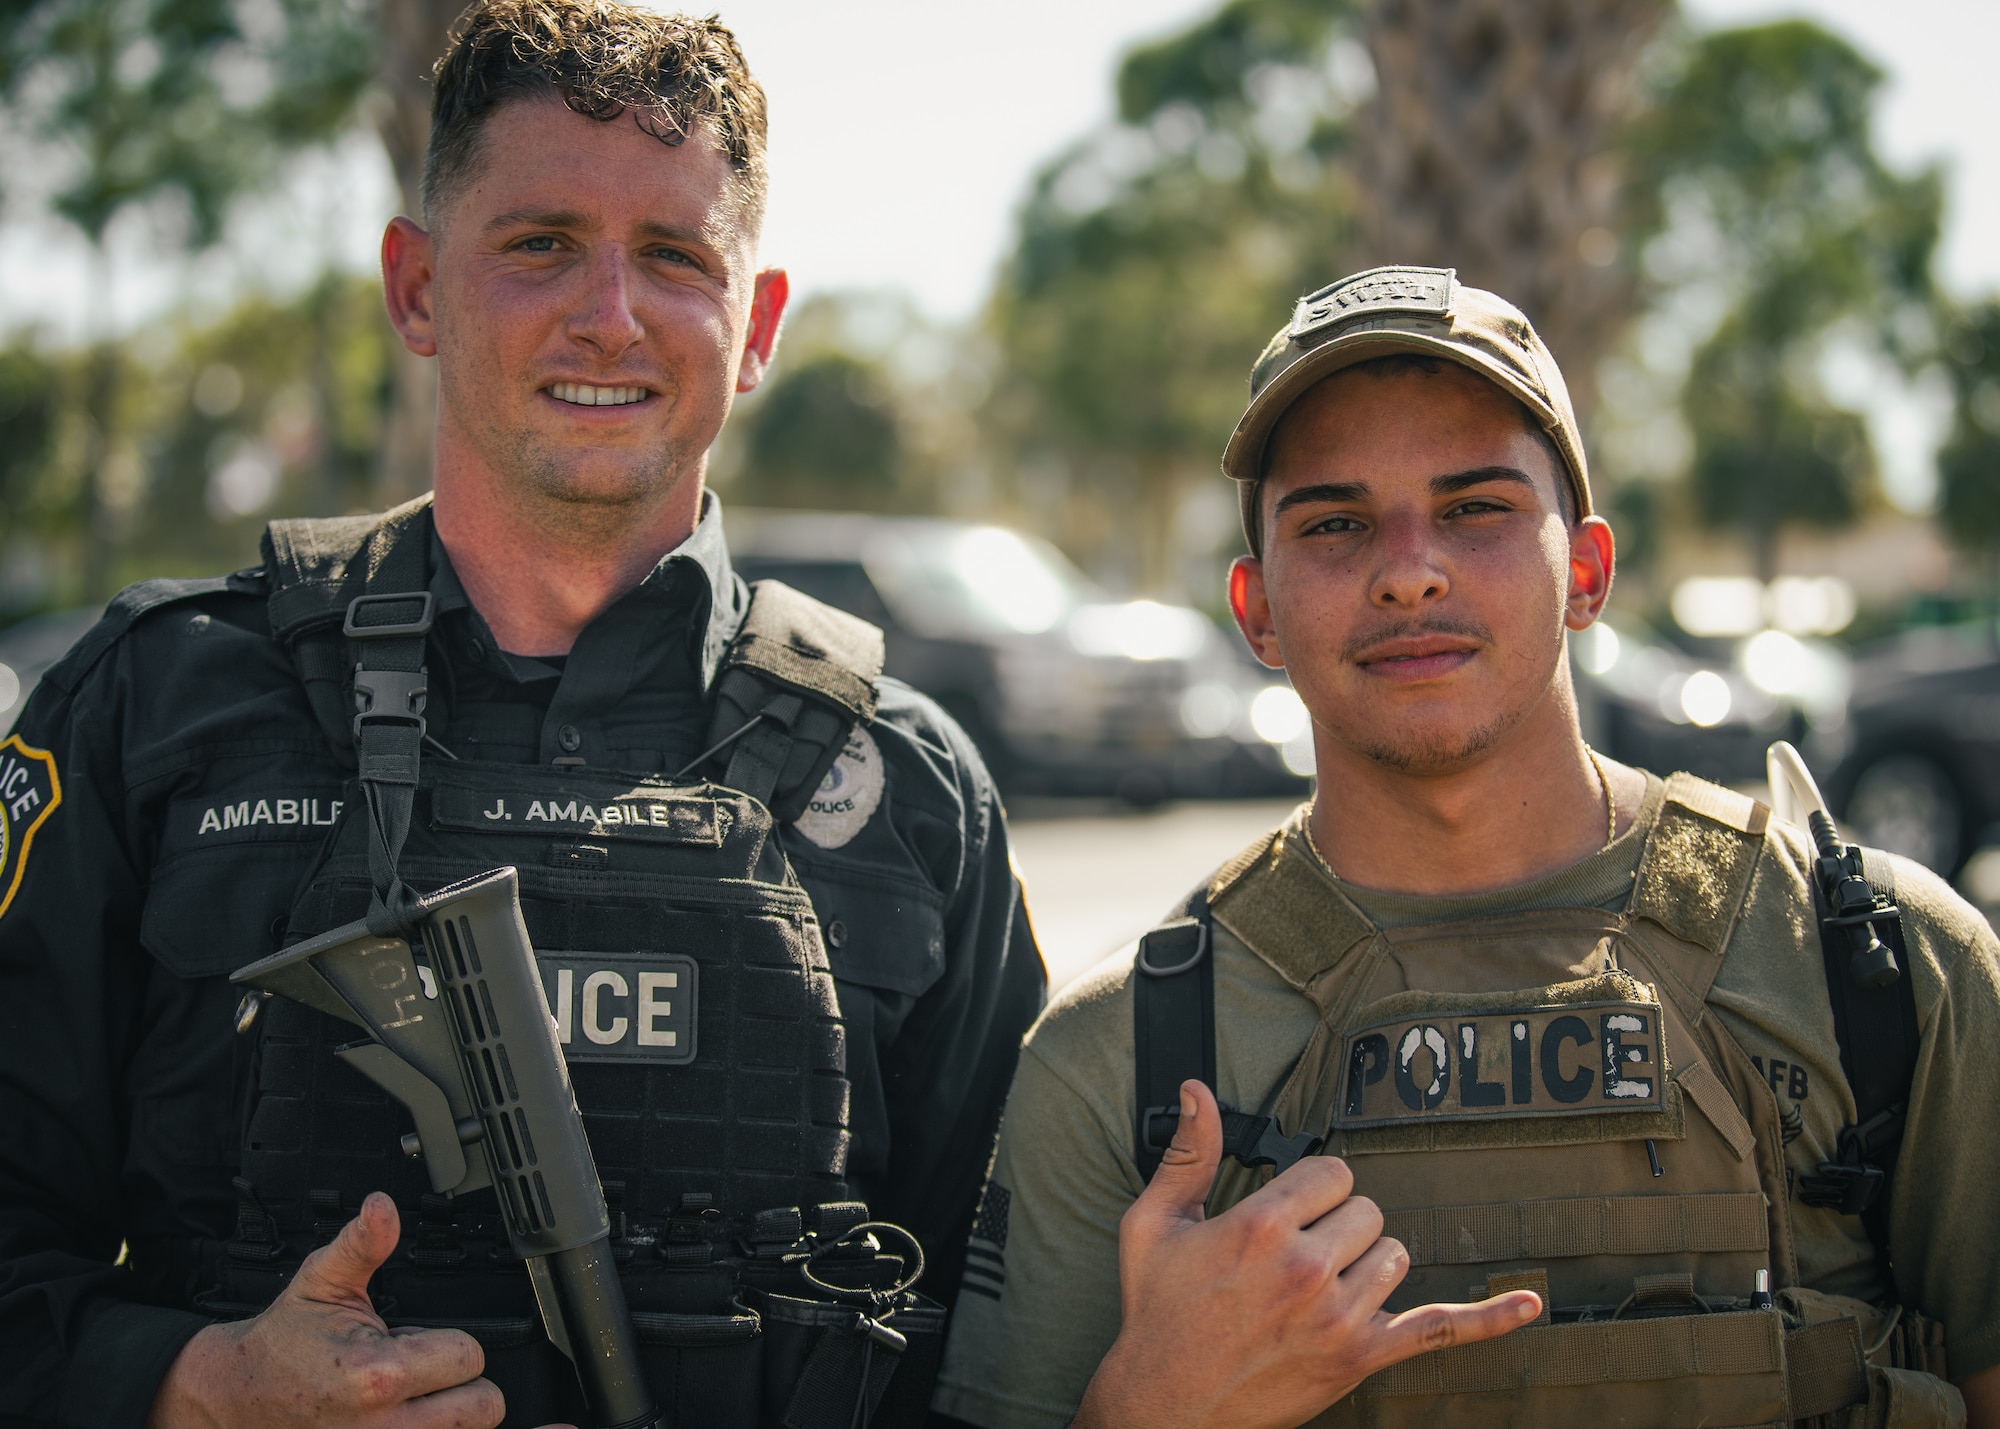 Joseph Amabile, 6th Security Forces Squadron (SFS) patrolman, and U.S. Air Force Senior Airman Jediath Lopez-Borrero, 6th SFS alarm monitor, pose for a photo following the Emergency Services Team (EST) tryouts at MacDill Air Force Base, Florida, Feb. 4, 2022.